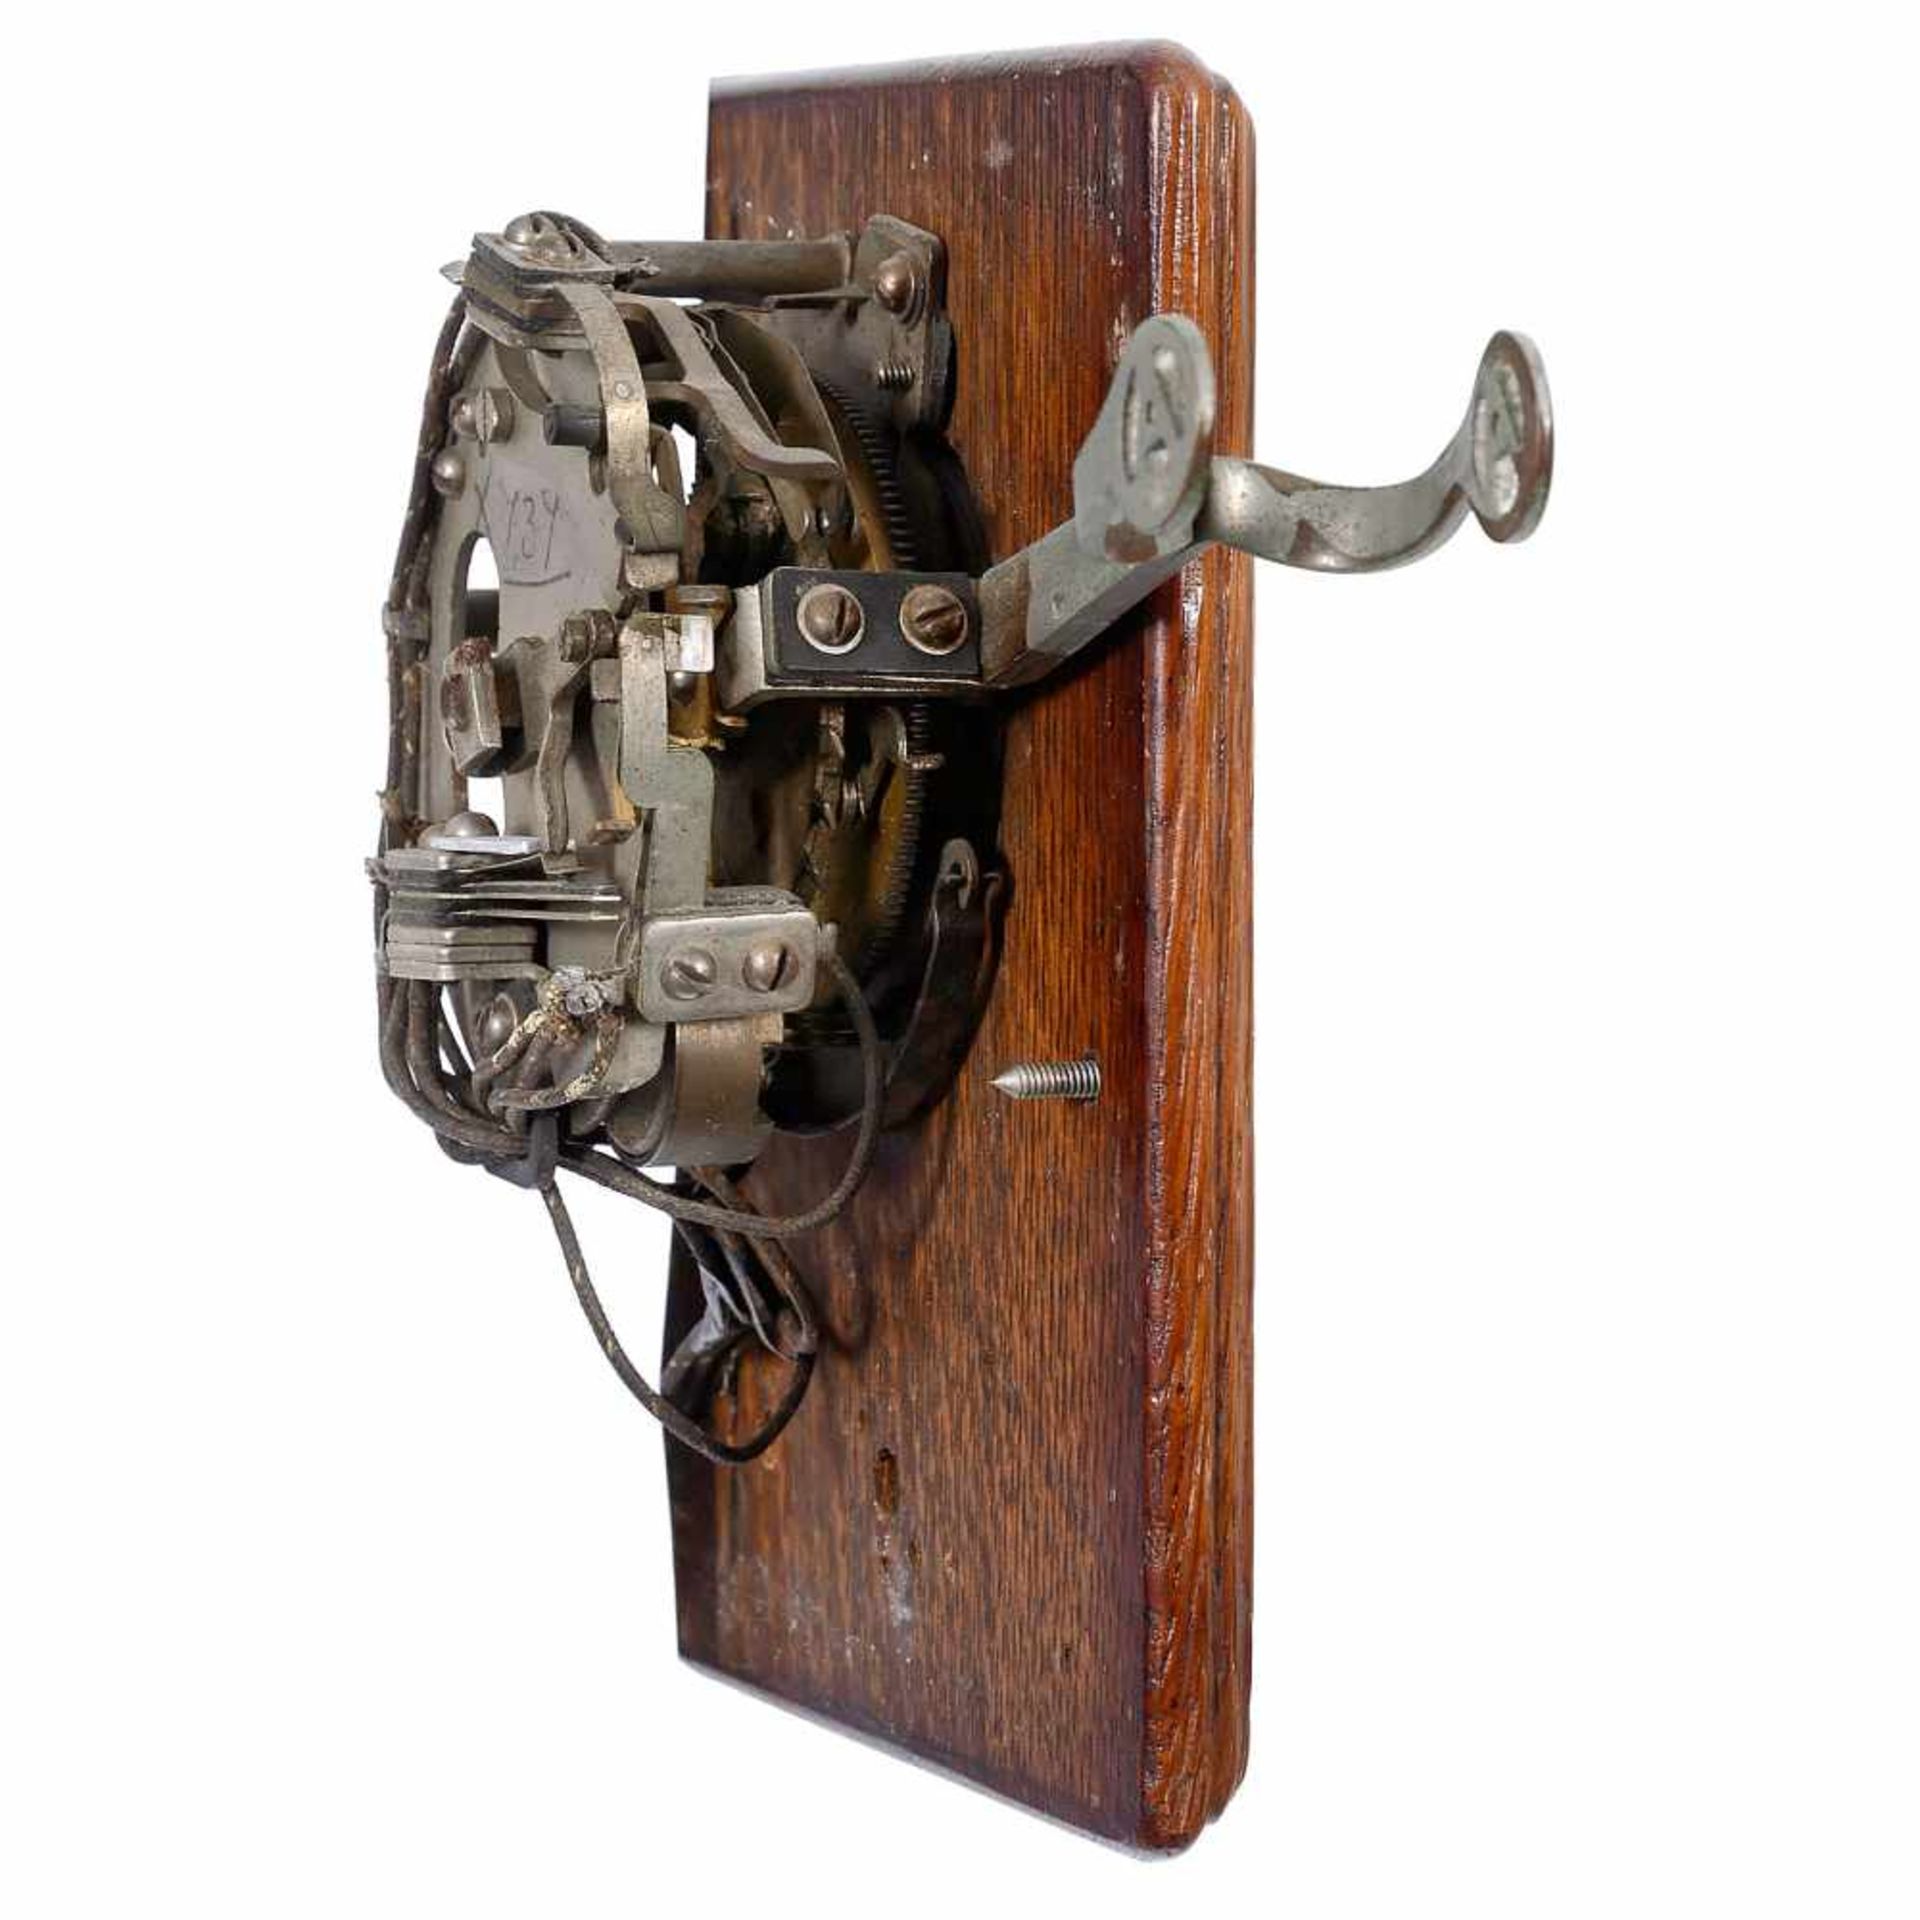 Antique American Dial Wall Phone, c. 1905Strowger Automatic Electric Company, Chicago. Unique - Bild 2 aus 2